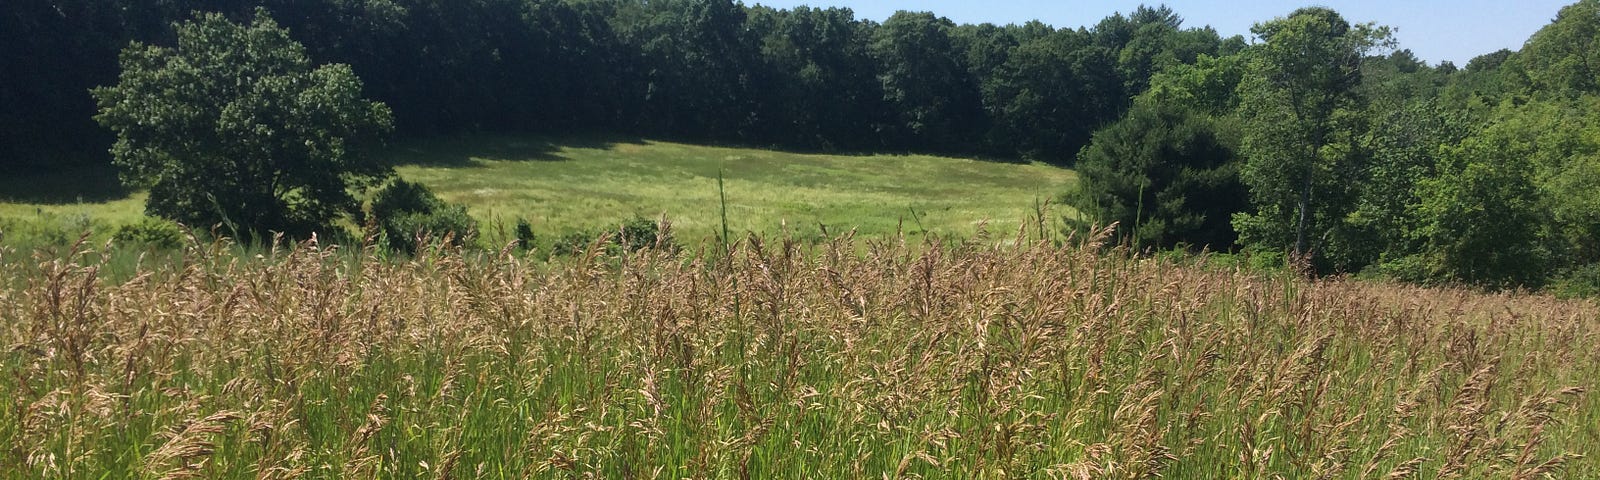 Photo of a field of summer grasses at the Audubon Center in Pomfret, CT. The Foreground included tall rye grasses that receed to the dark tree line in the distance under a cloudless blue sky.